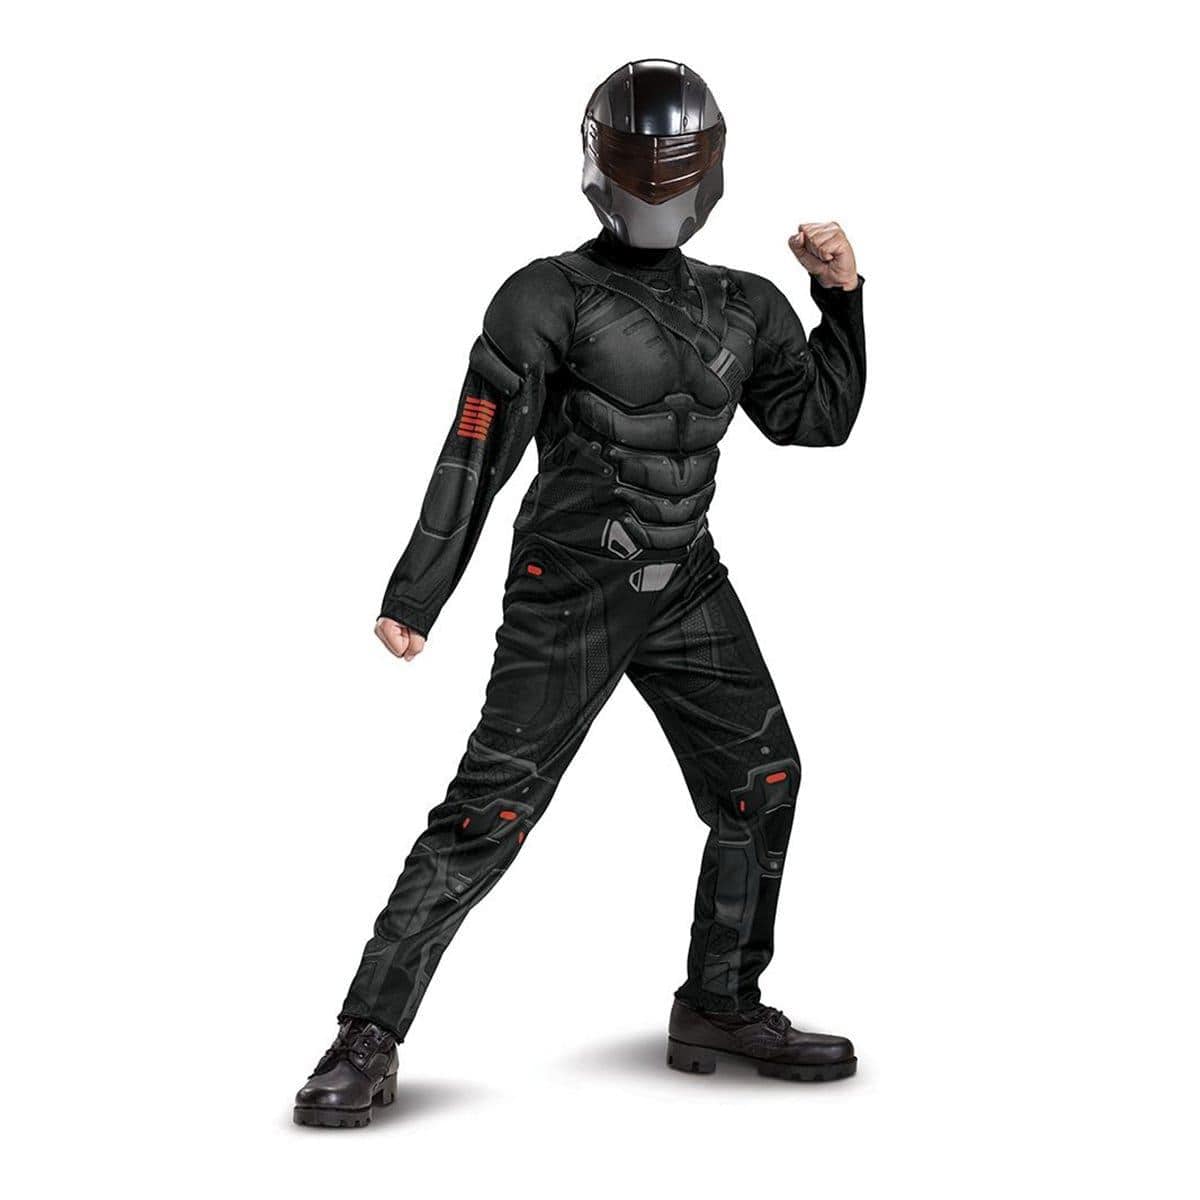 Buy Costumes Snake Eyes Muscle Costume for kids, G.I. Joe sold at Party Expert